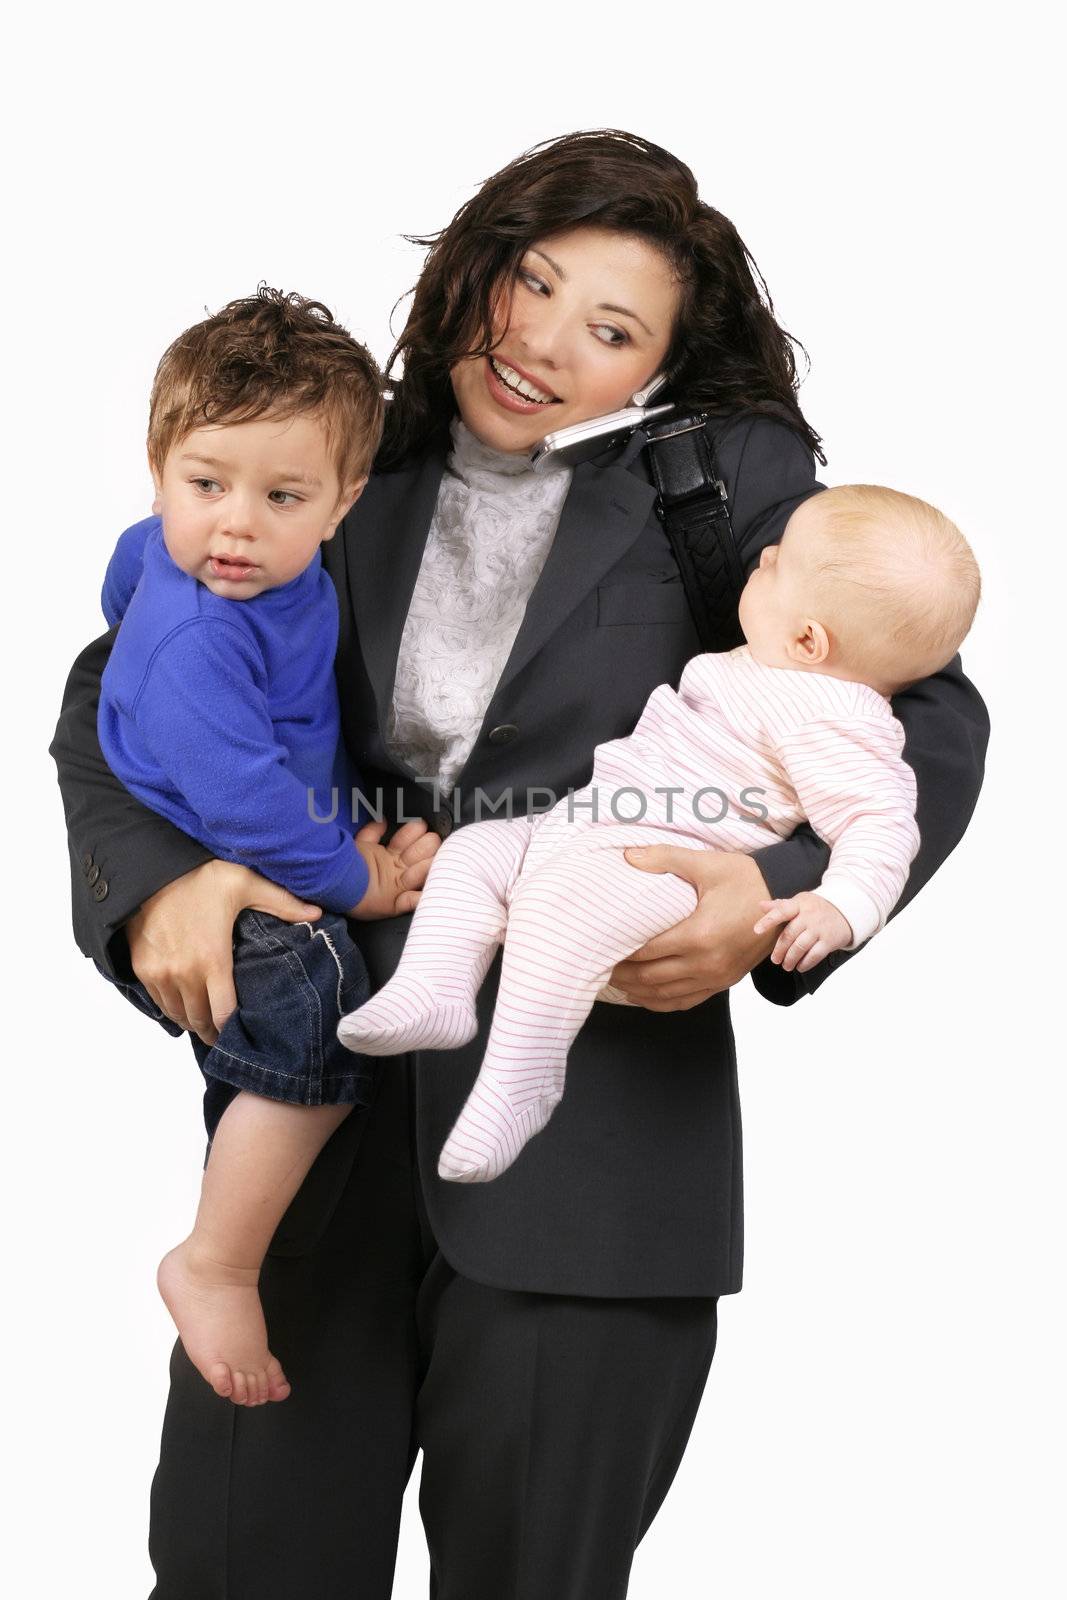 A career woman busy with toddler, baby and telephone